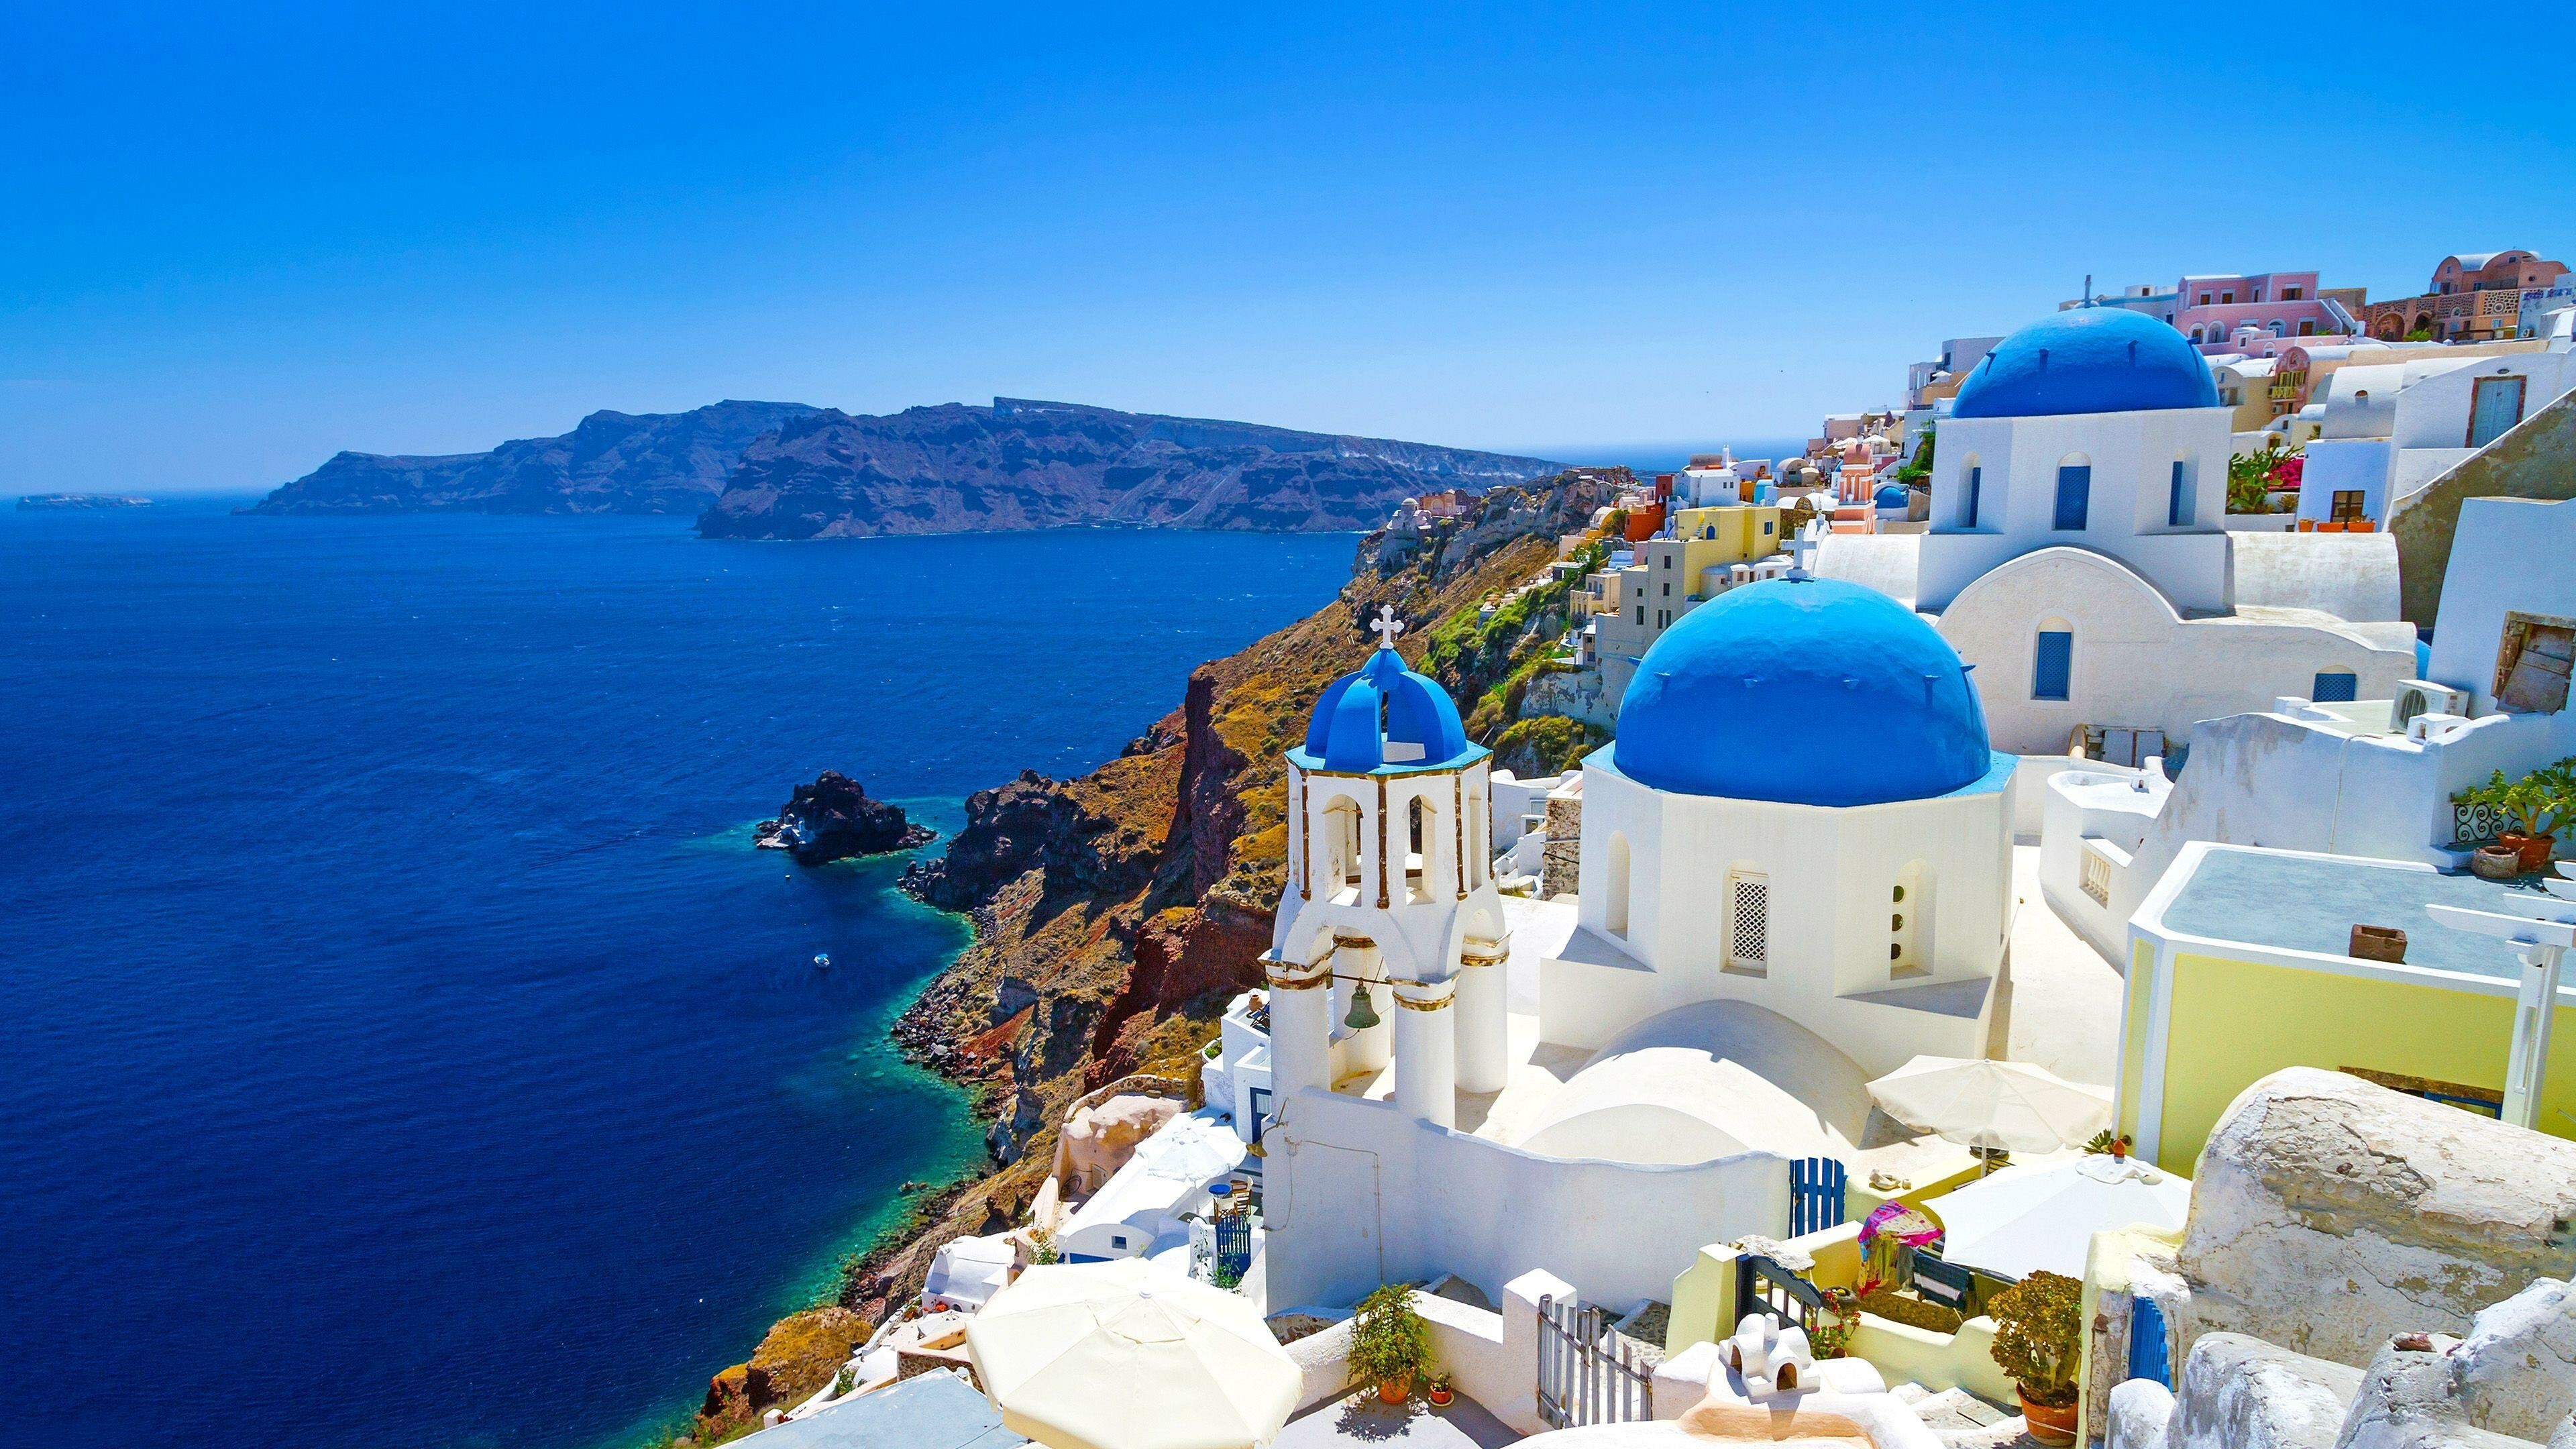 Santorini Greece Wallpaper: HD, 4K, 5K for PC and Mobile. Download free image for iPhone, Android